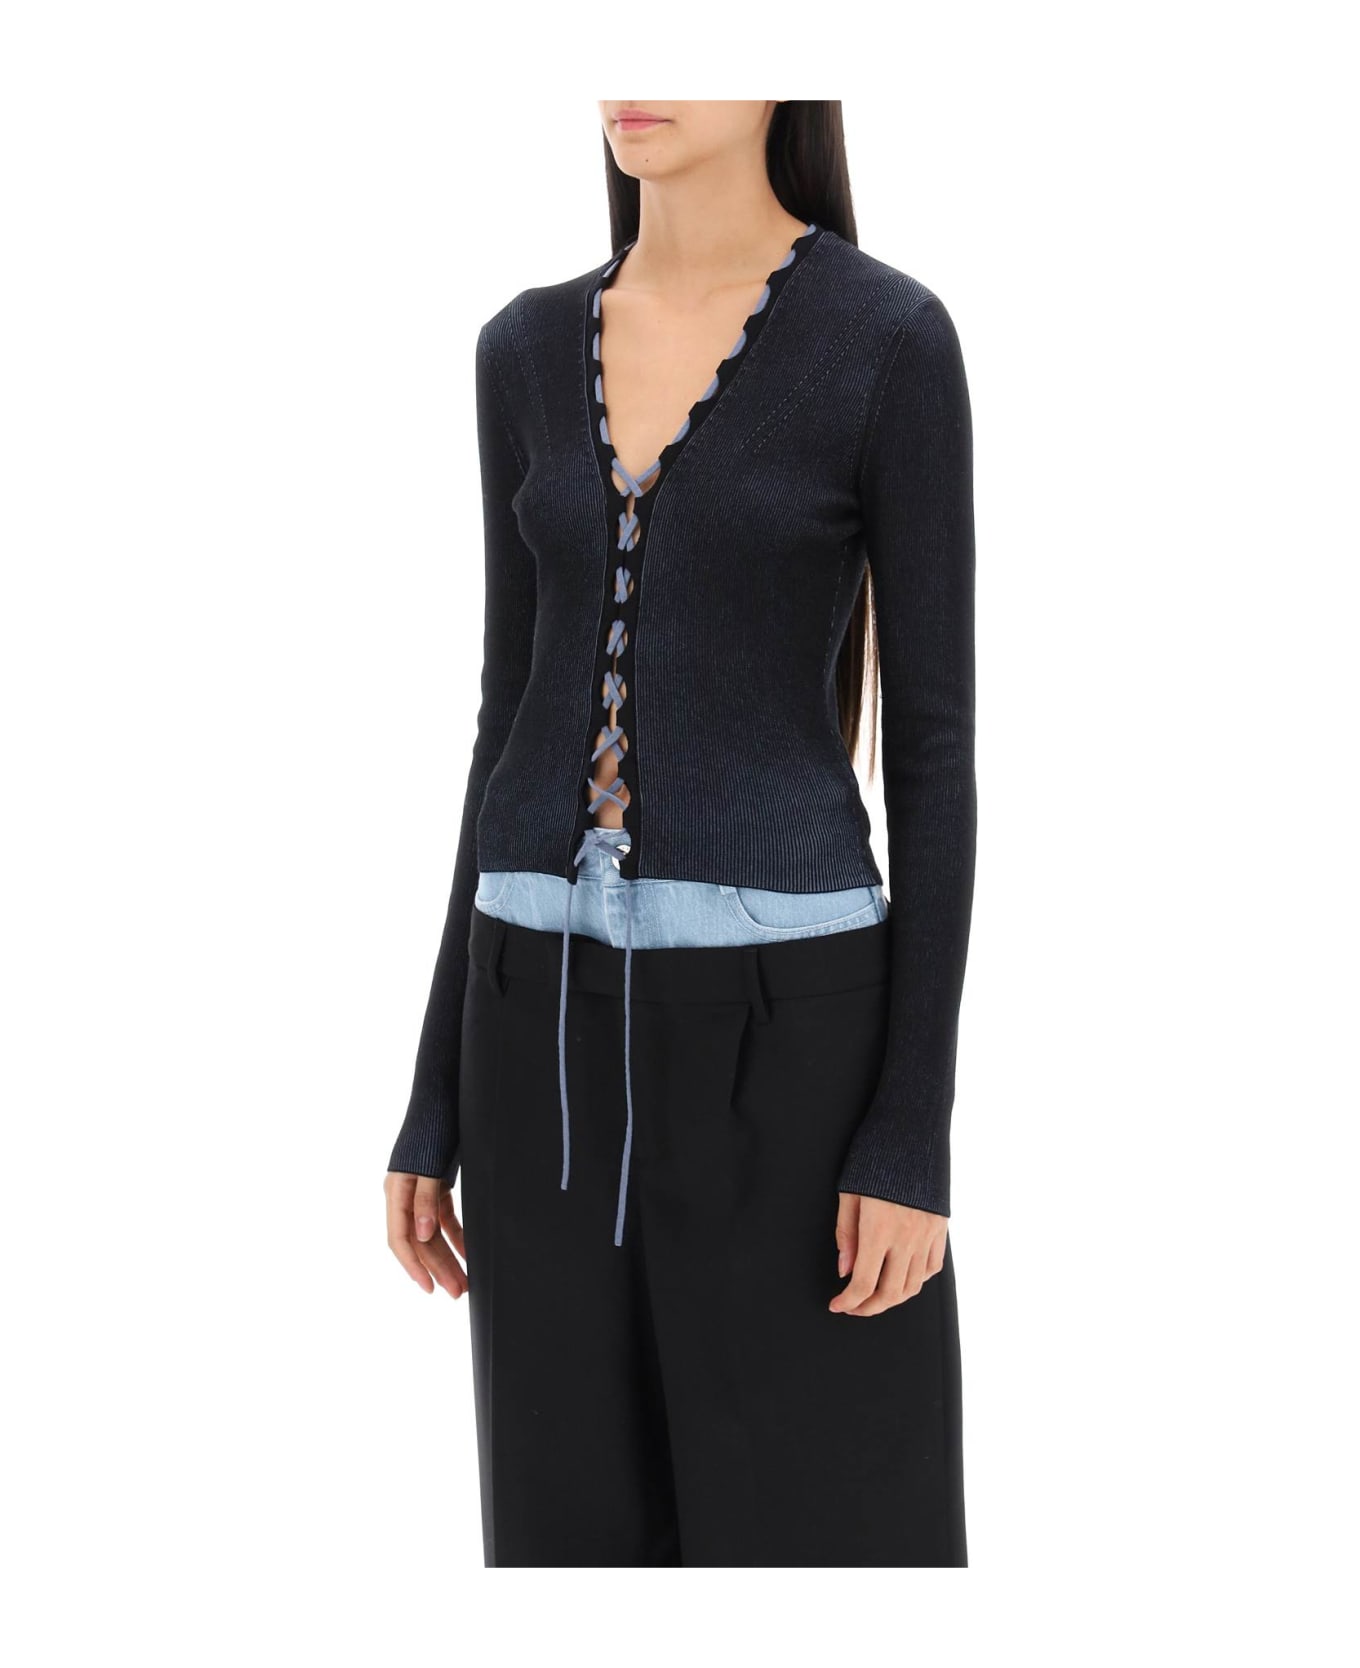 Dion Lee Two-tone Lace-up Cardigan - BLACK STORM BLUE (Black) カーディガン